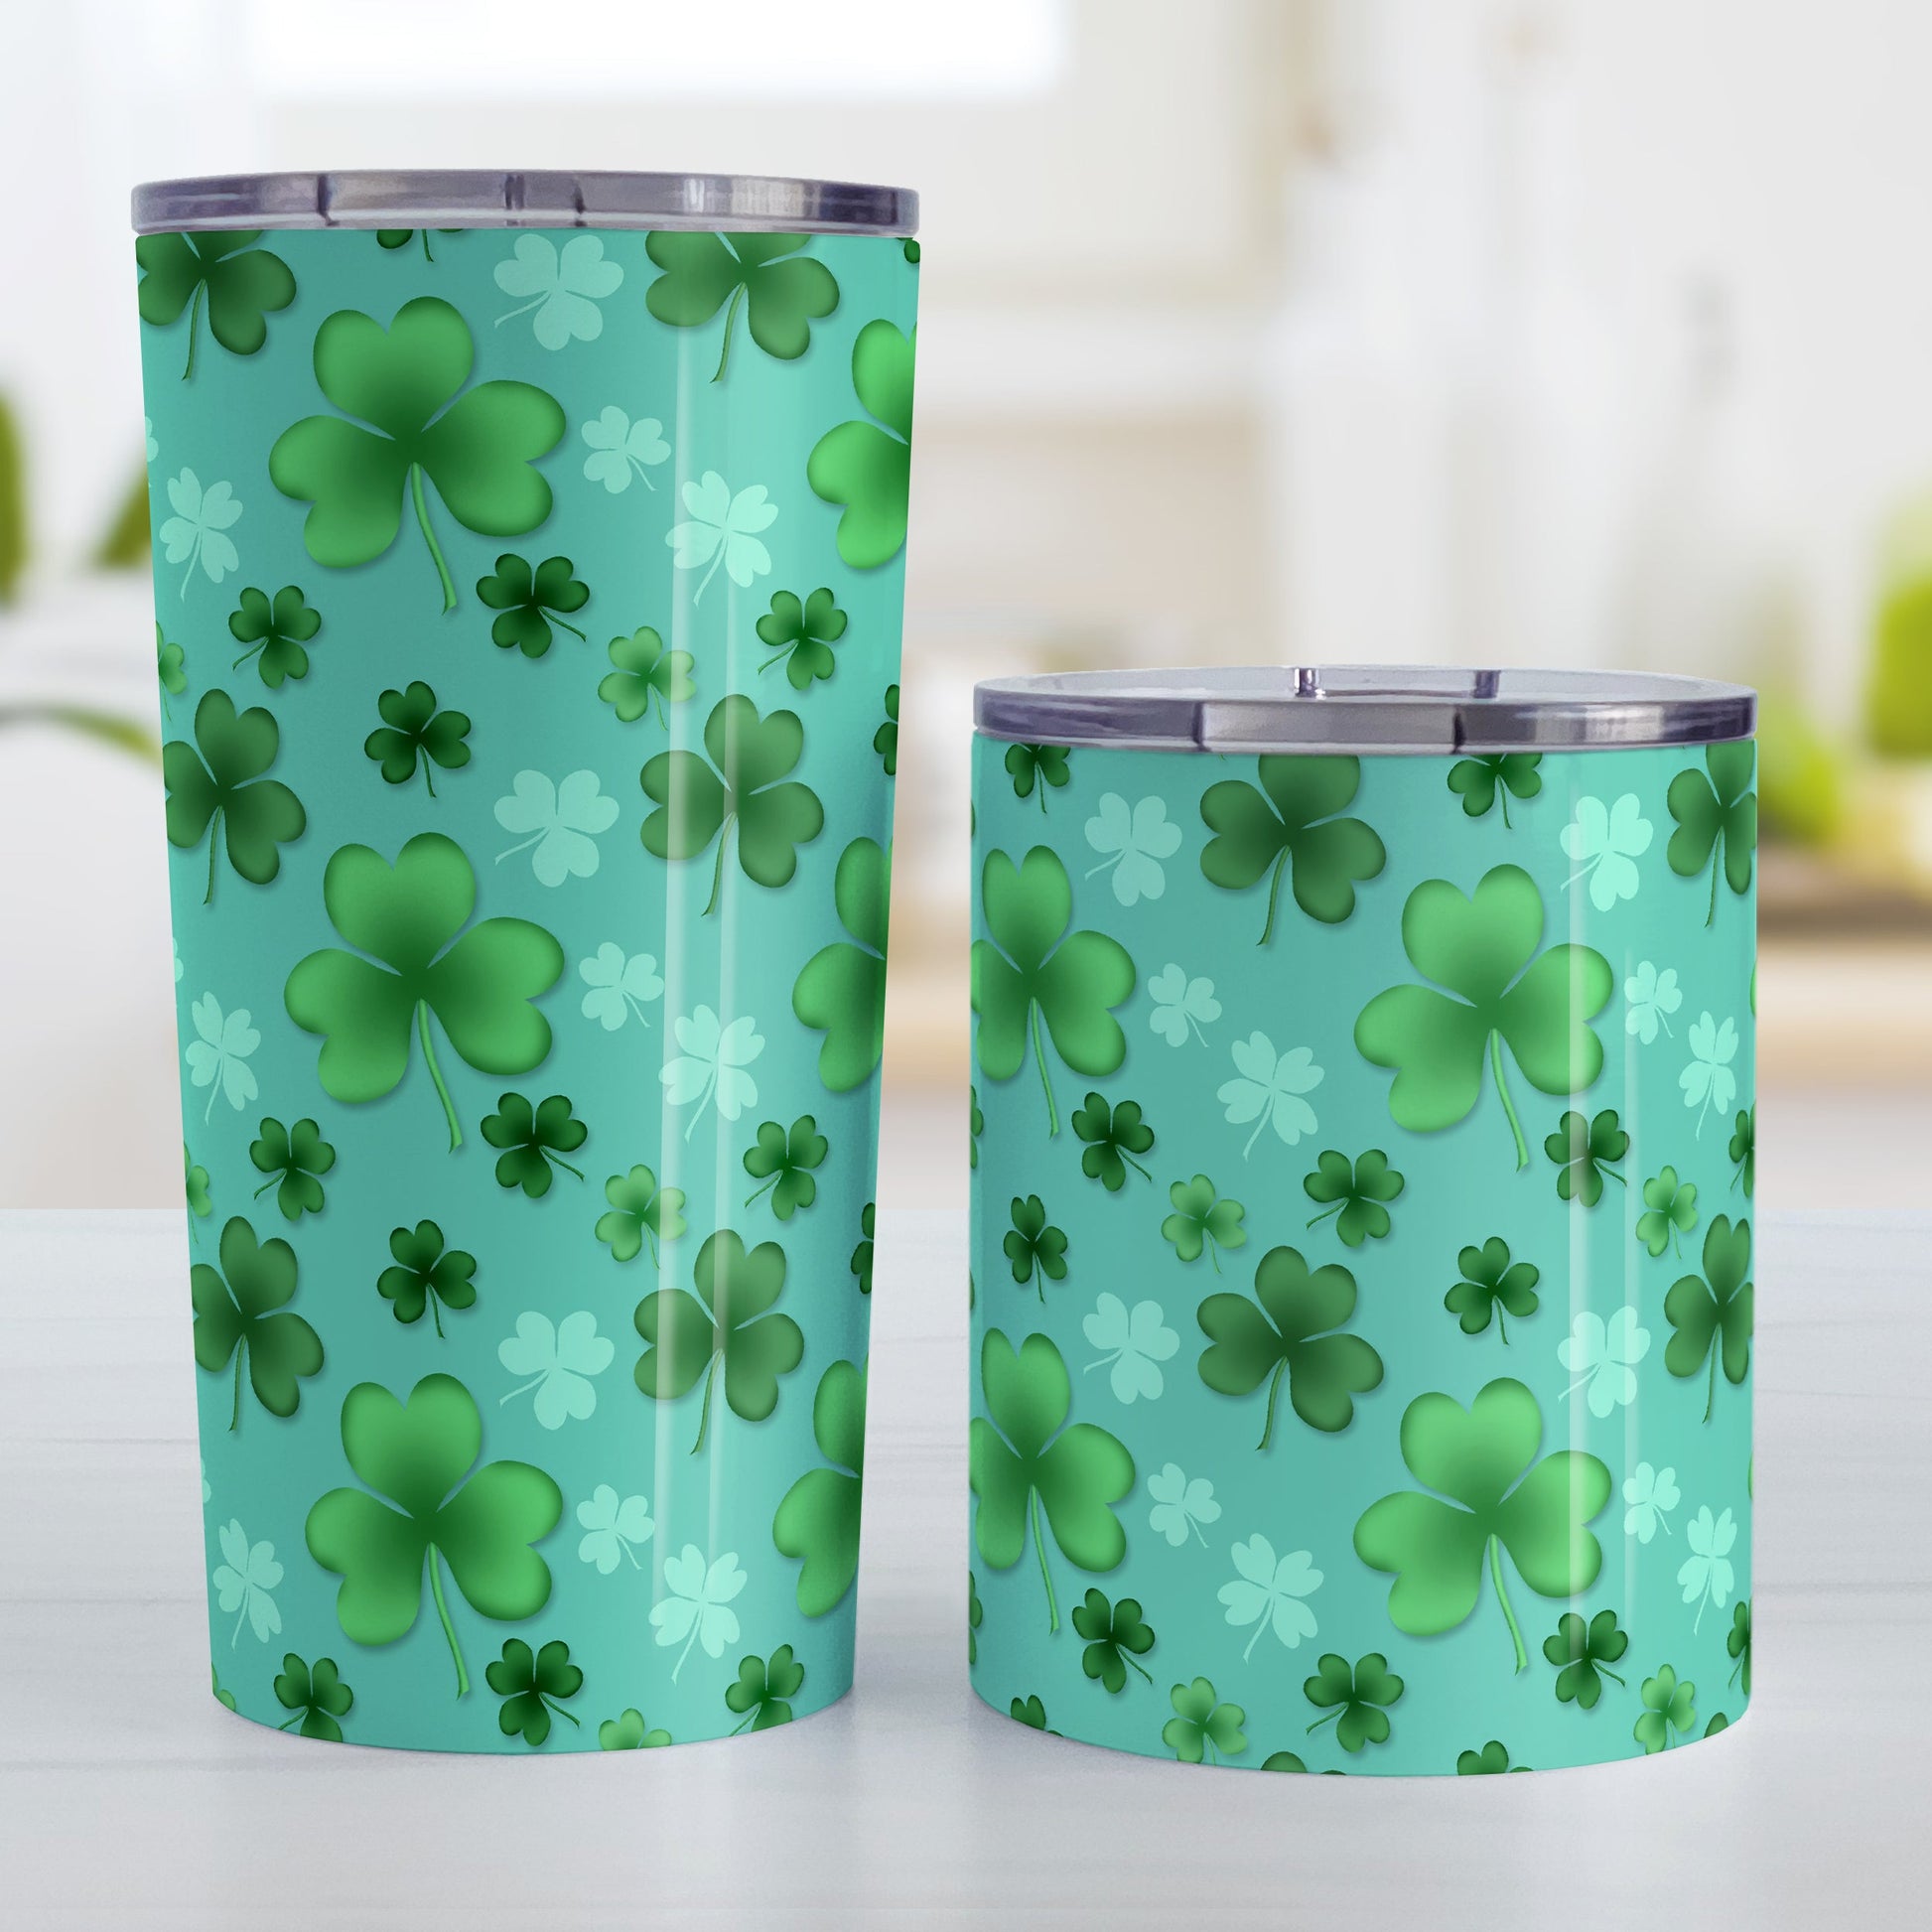 Lucky Clover Pattern Teal and Green Tumbler Cup (20oz and 10oz, stainless steel insulated) at Amy's Coffee Mugs. Tumbler cups designed with a lucky green clover pattern with a 4-leaf clover among 3-leaf clovers, in different shades of green, over a teal background that wraps around the cups. Photo shows both sized cups next to each other.